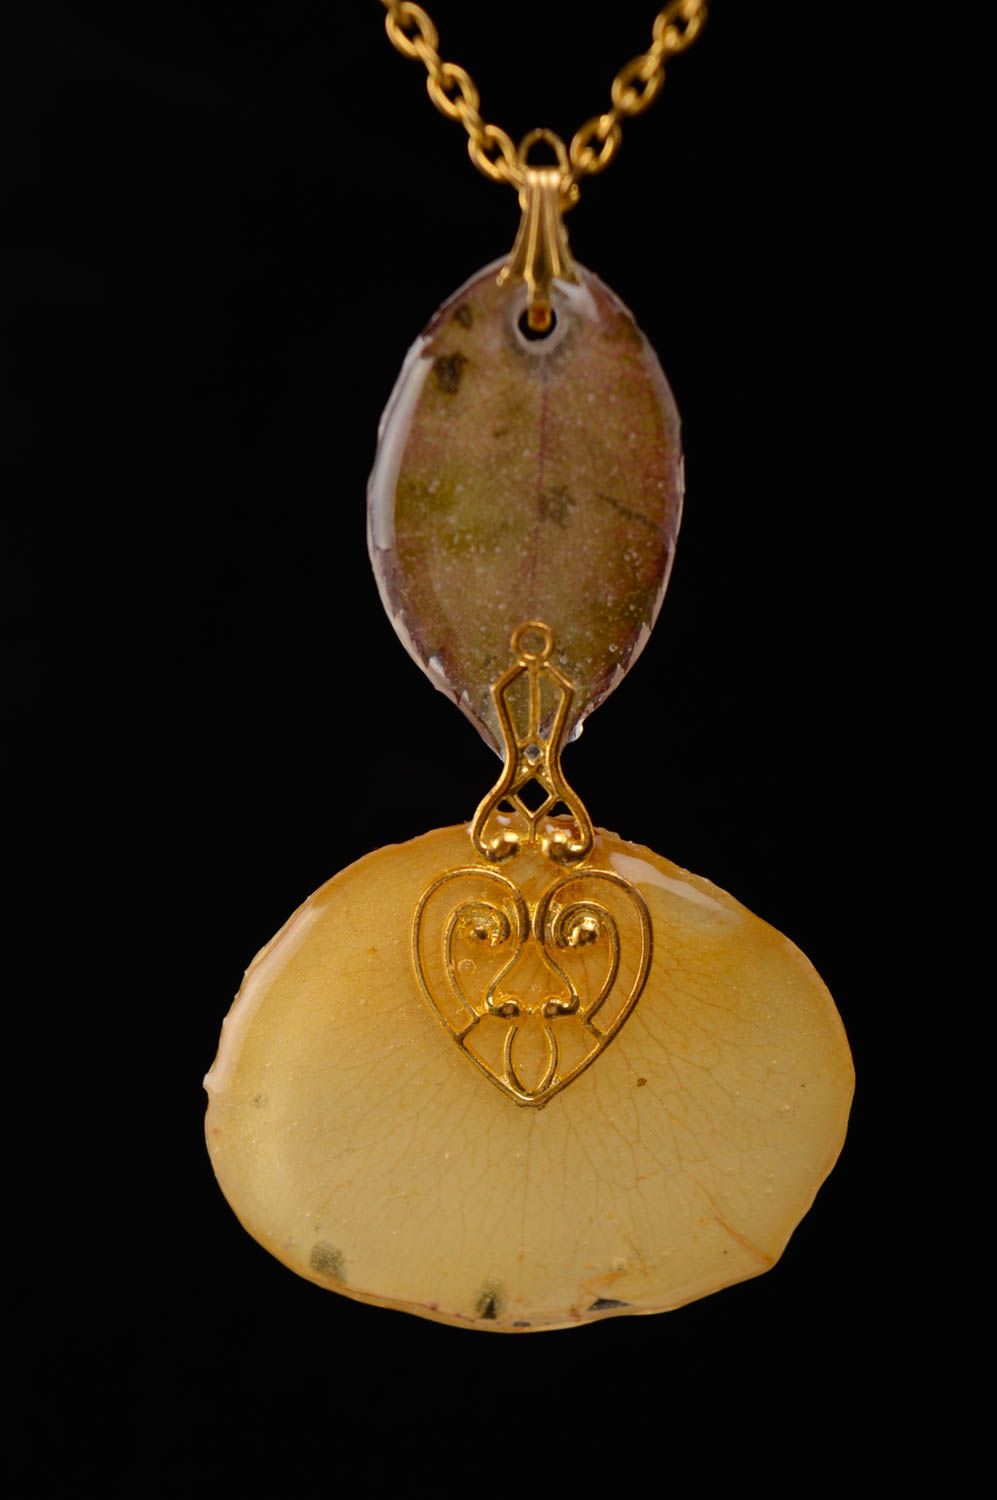 Pendant with real flower inside on chain photo 2